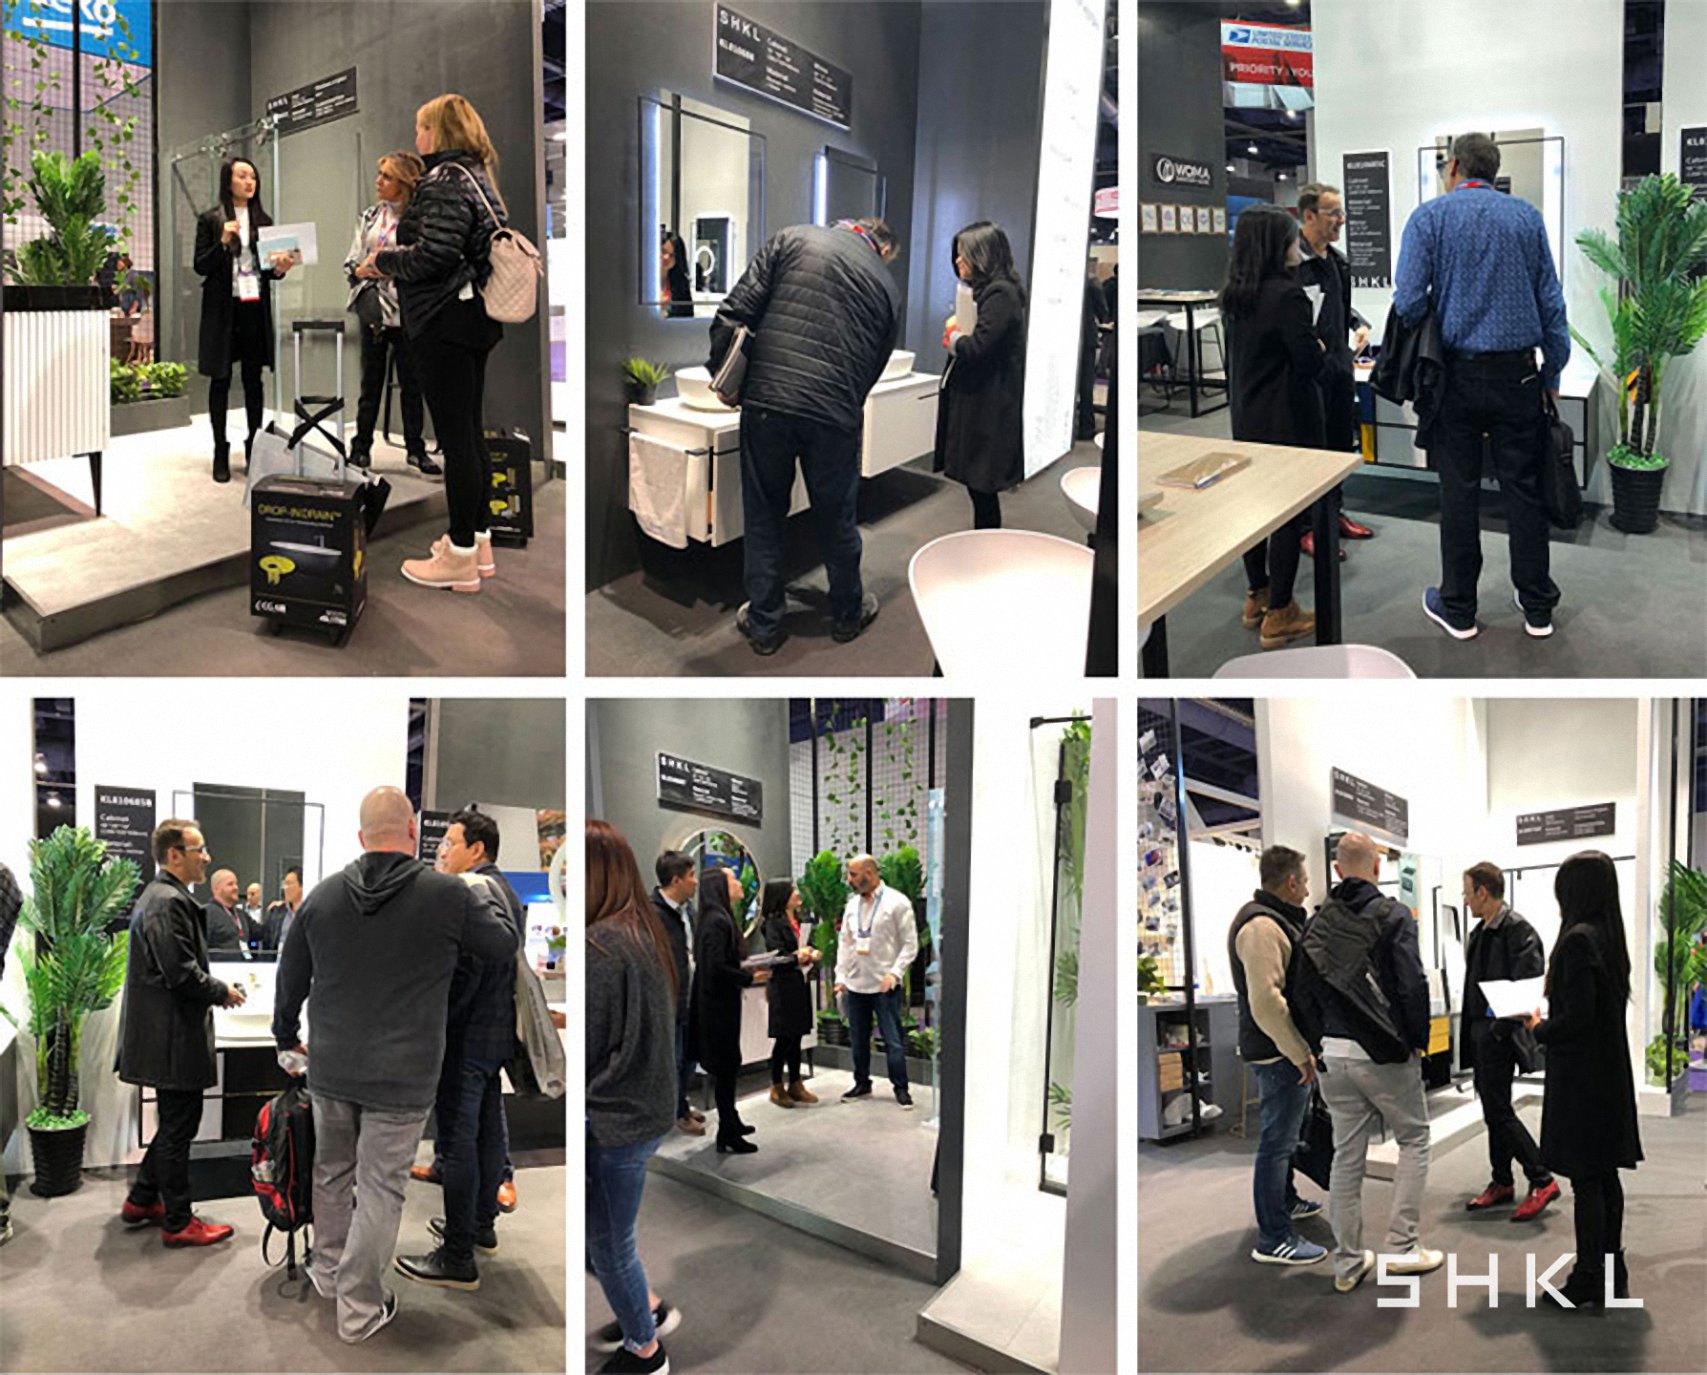 KBIS 2019, SHKL participated KBIS for the third time 8